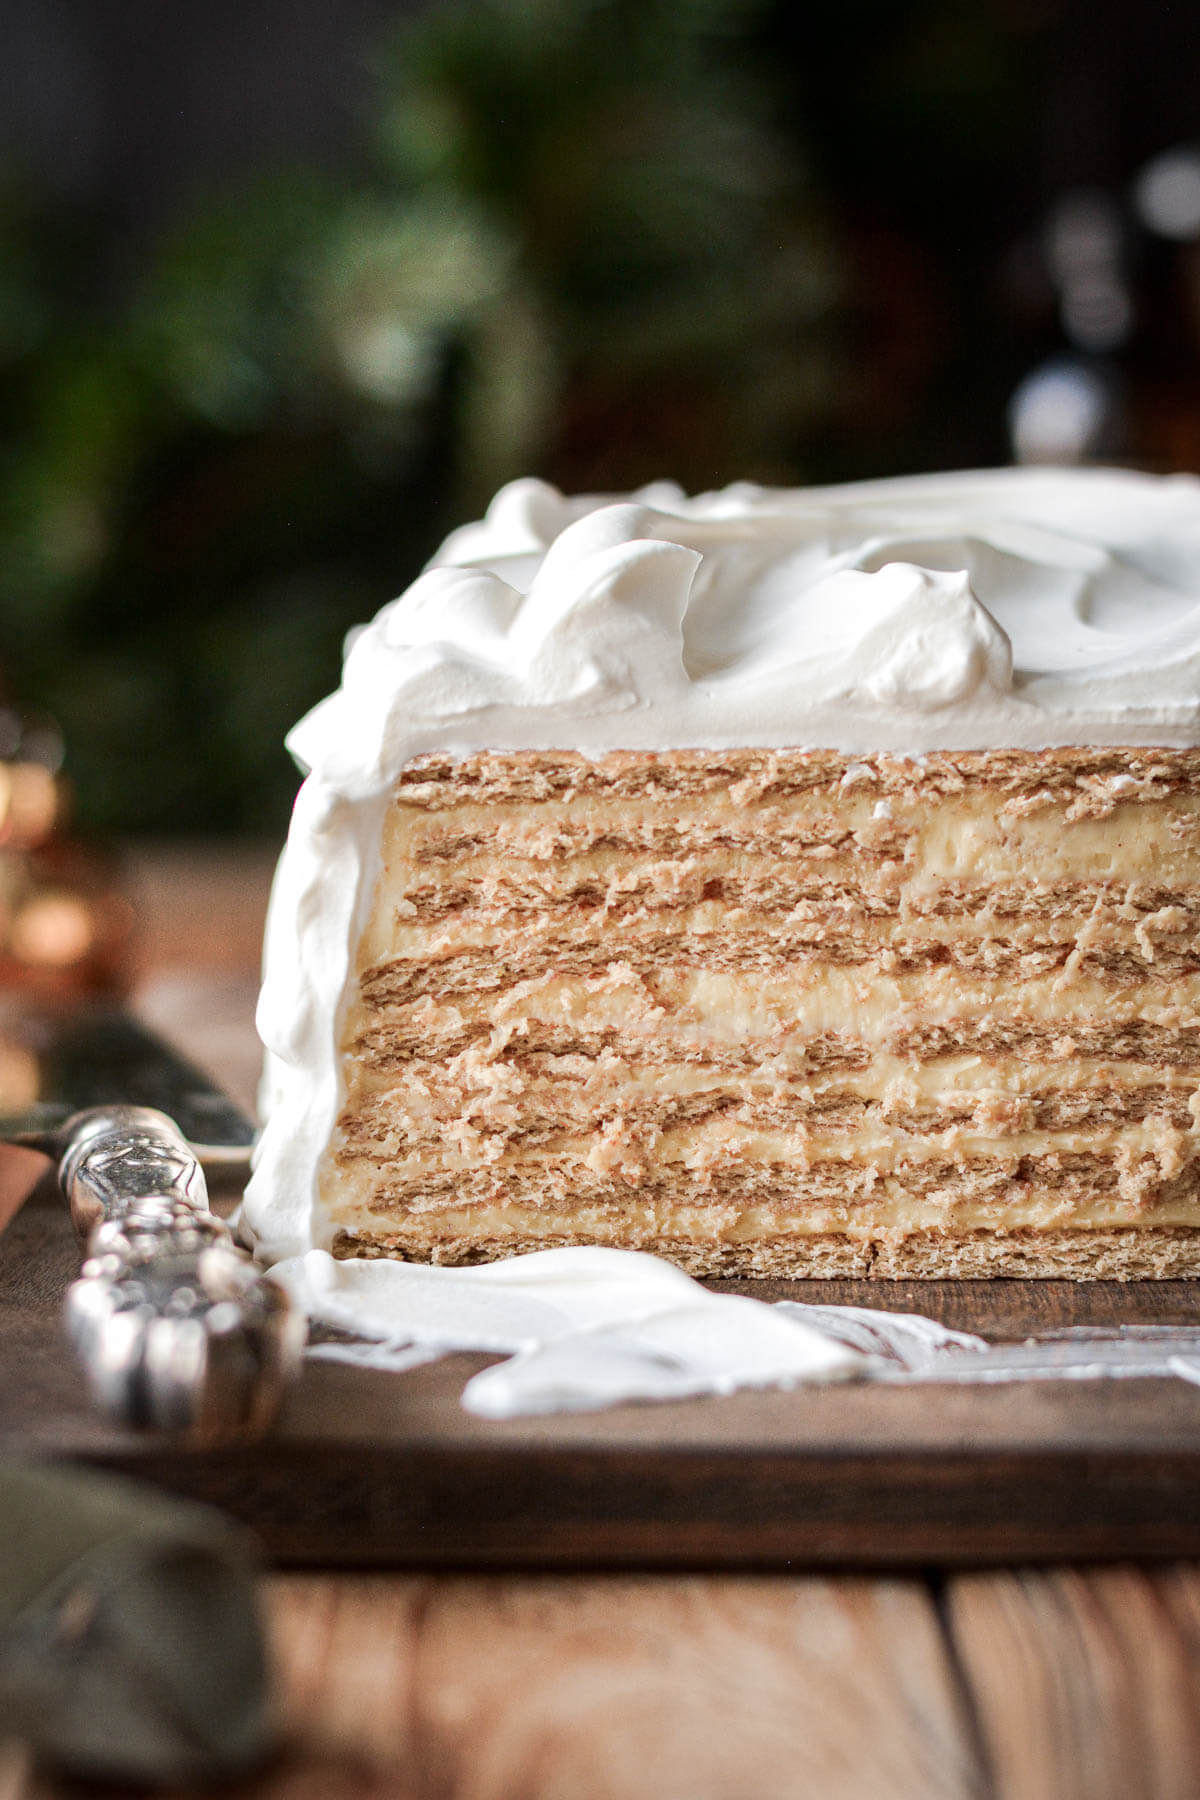 Eggnog icebox cake, with a slice cut to show the layers inside.